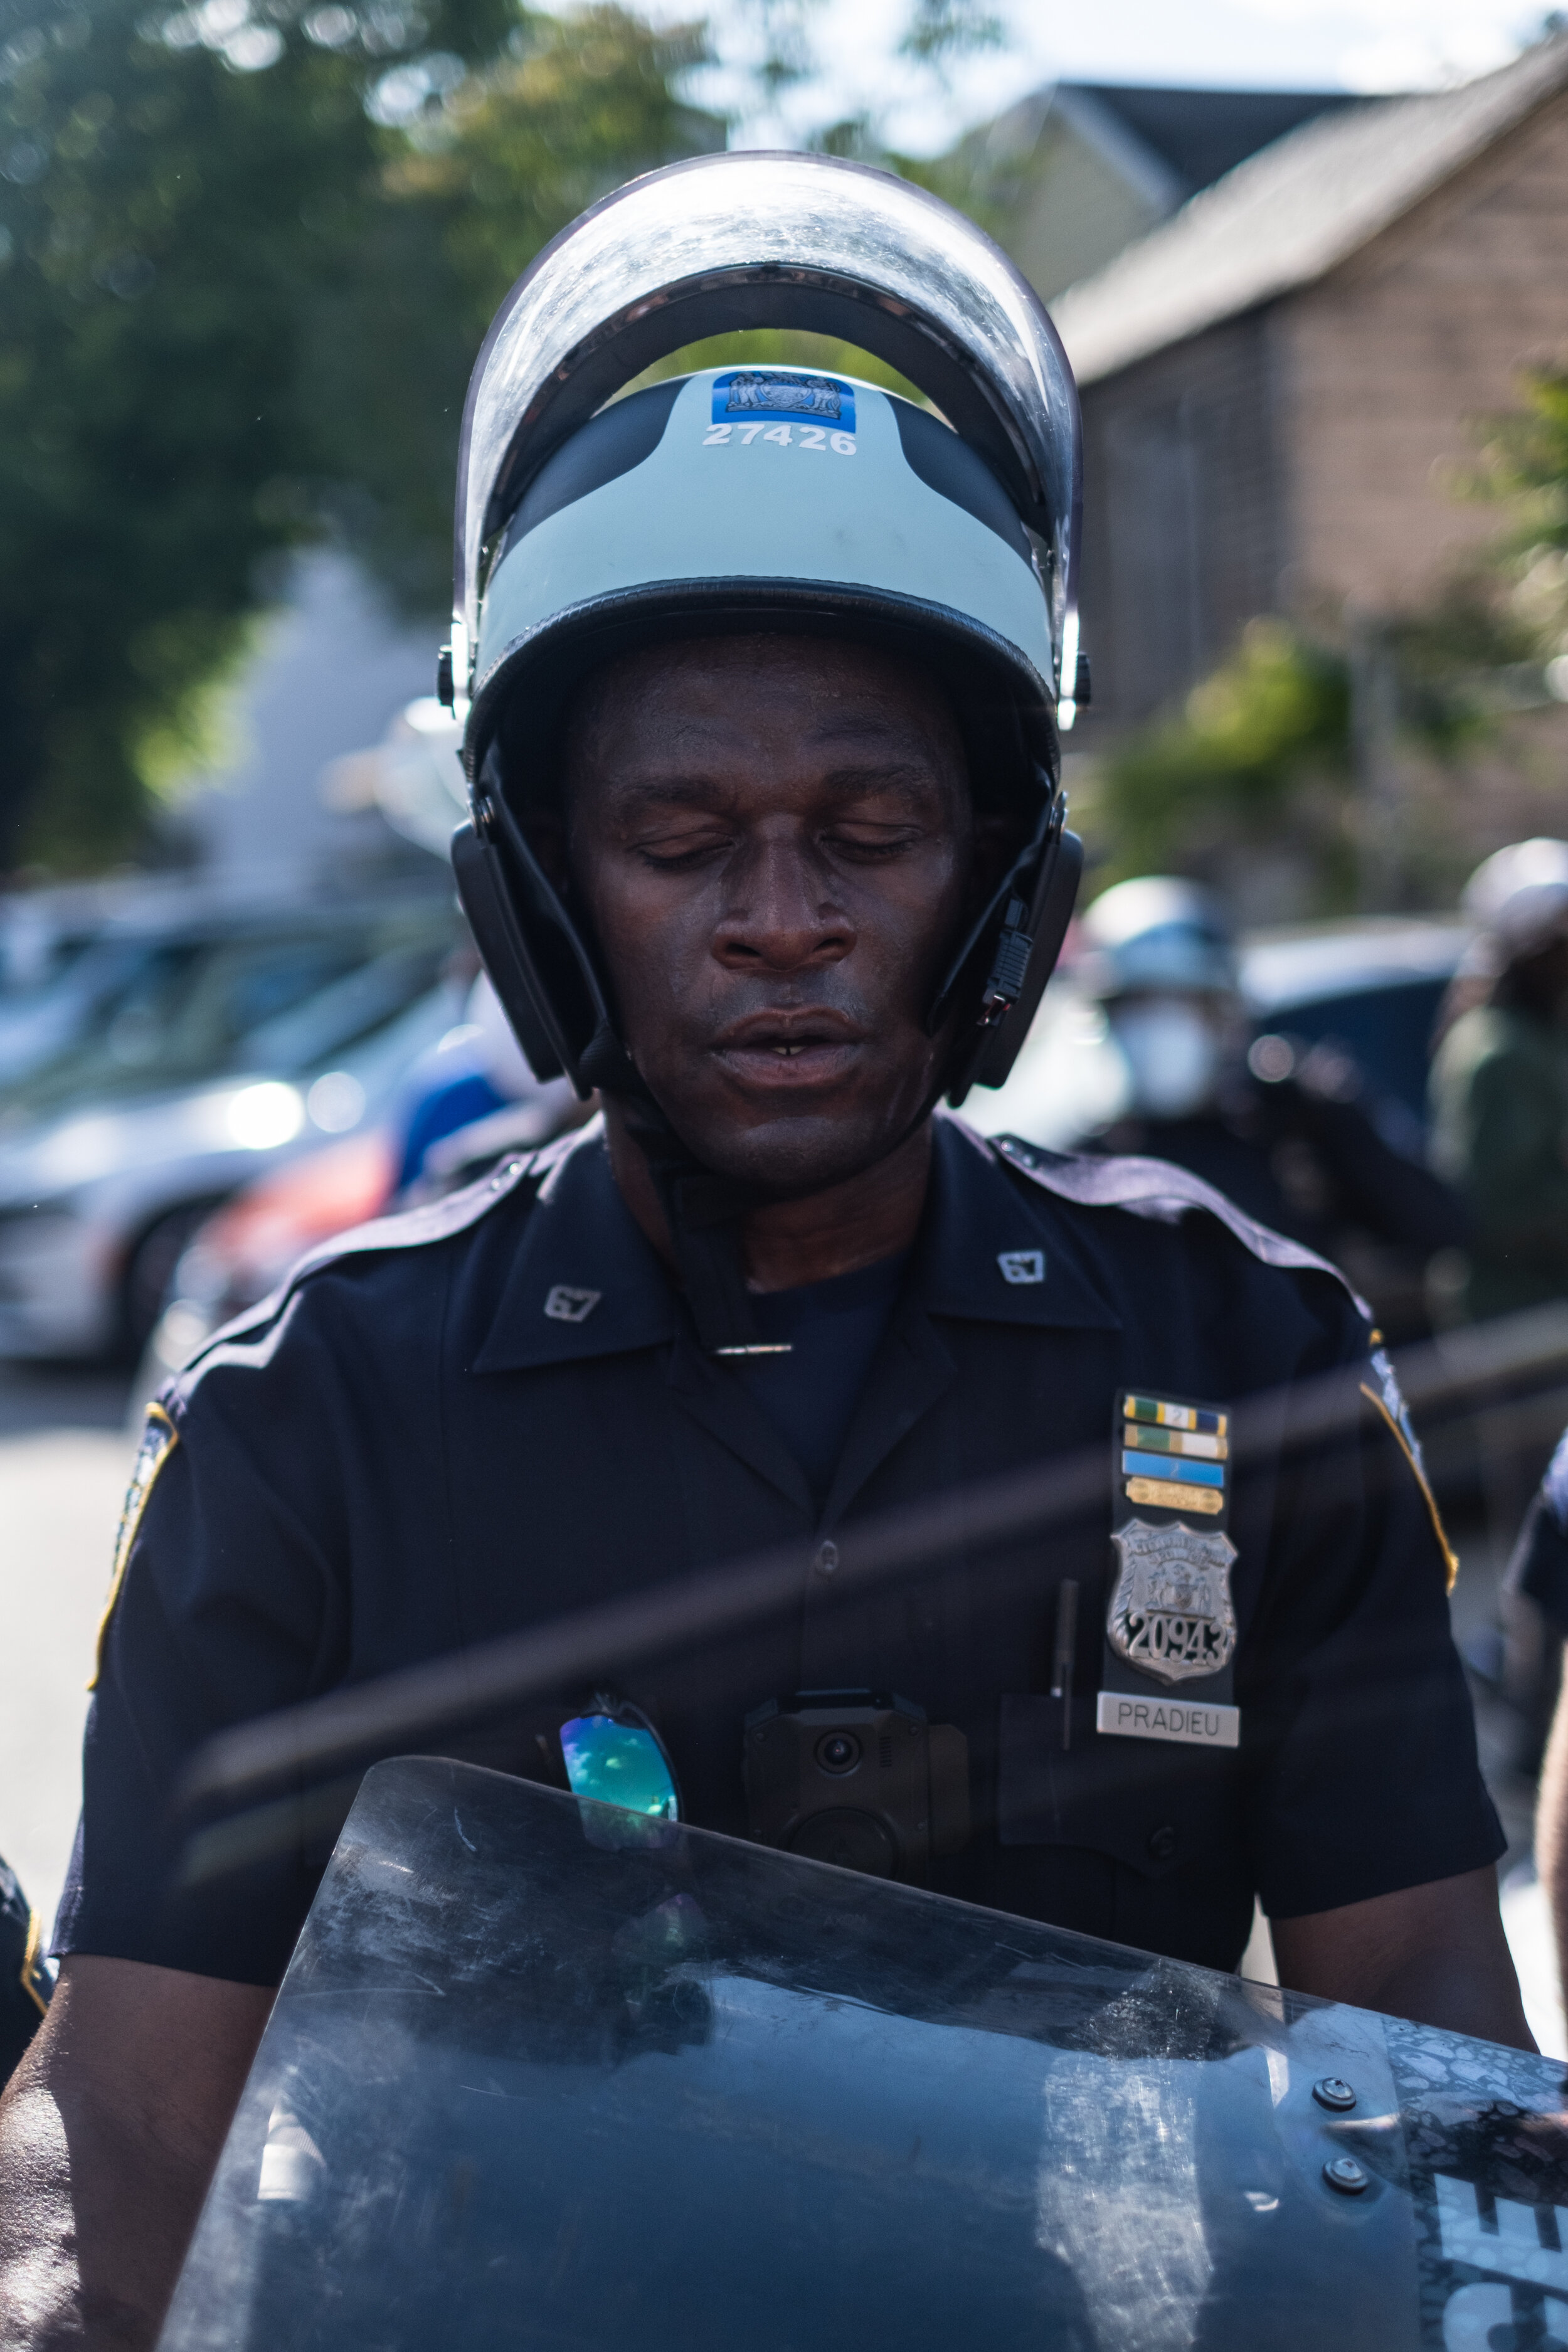  May 30, 2020: New York, NY -   A police officer takes a deep breath after Protesters clash with NYPD officers outside of the 67th precinct in Brooklyn after George Floyd was killed while being detained by Minneapolis police on May 25.  